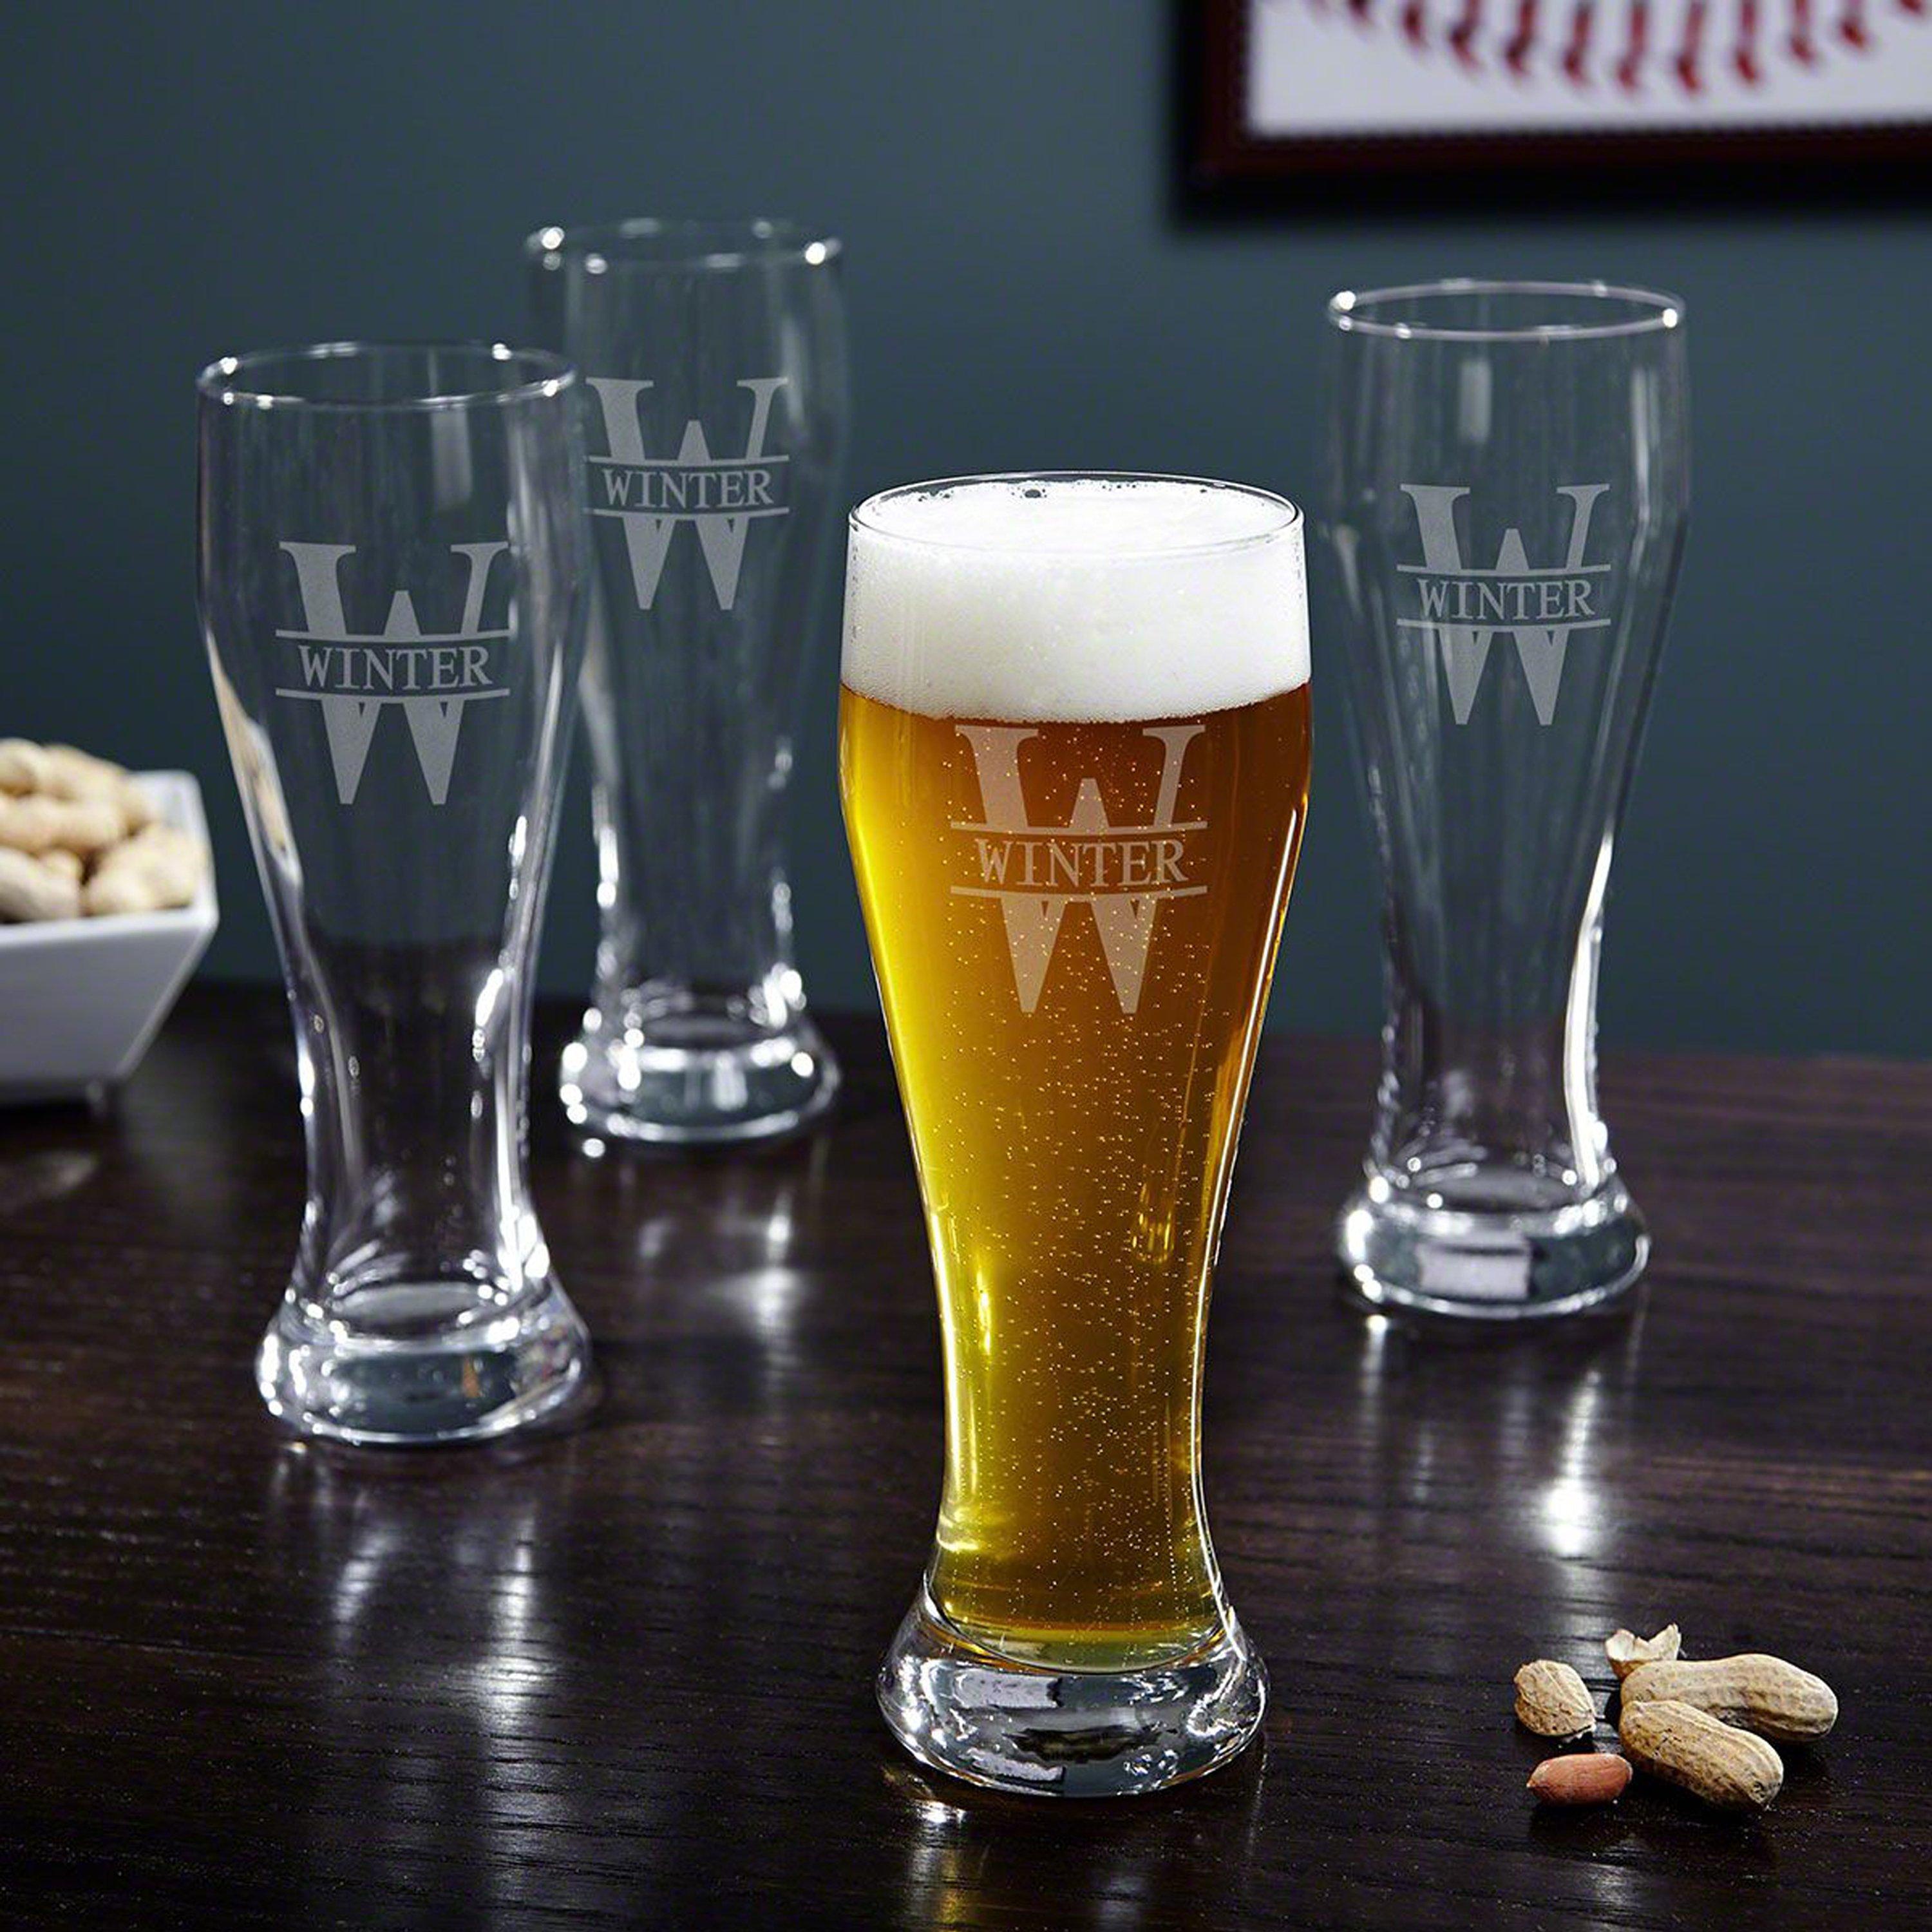 THE Beer Glass (Set of 4)